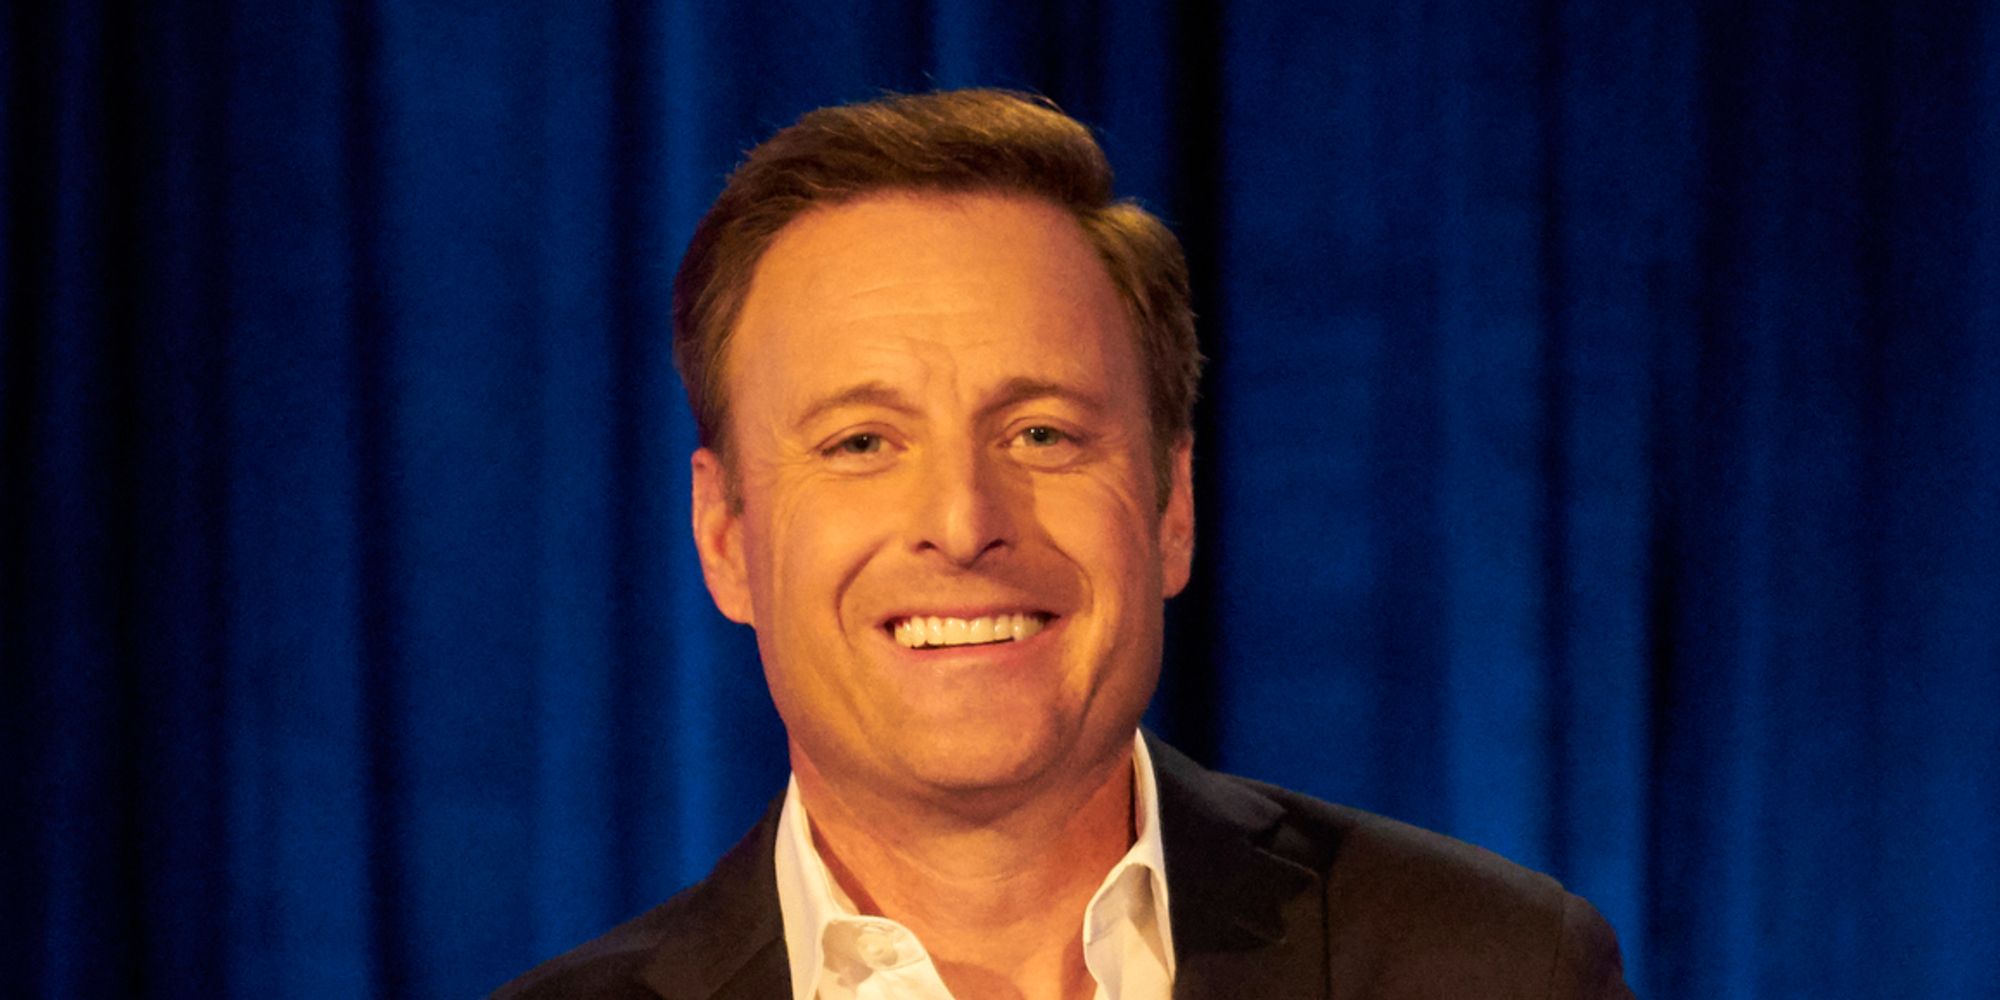 Chris Harrison smiling in front of blue curtain backdrop in The Bachelor